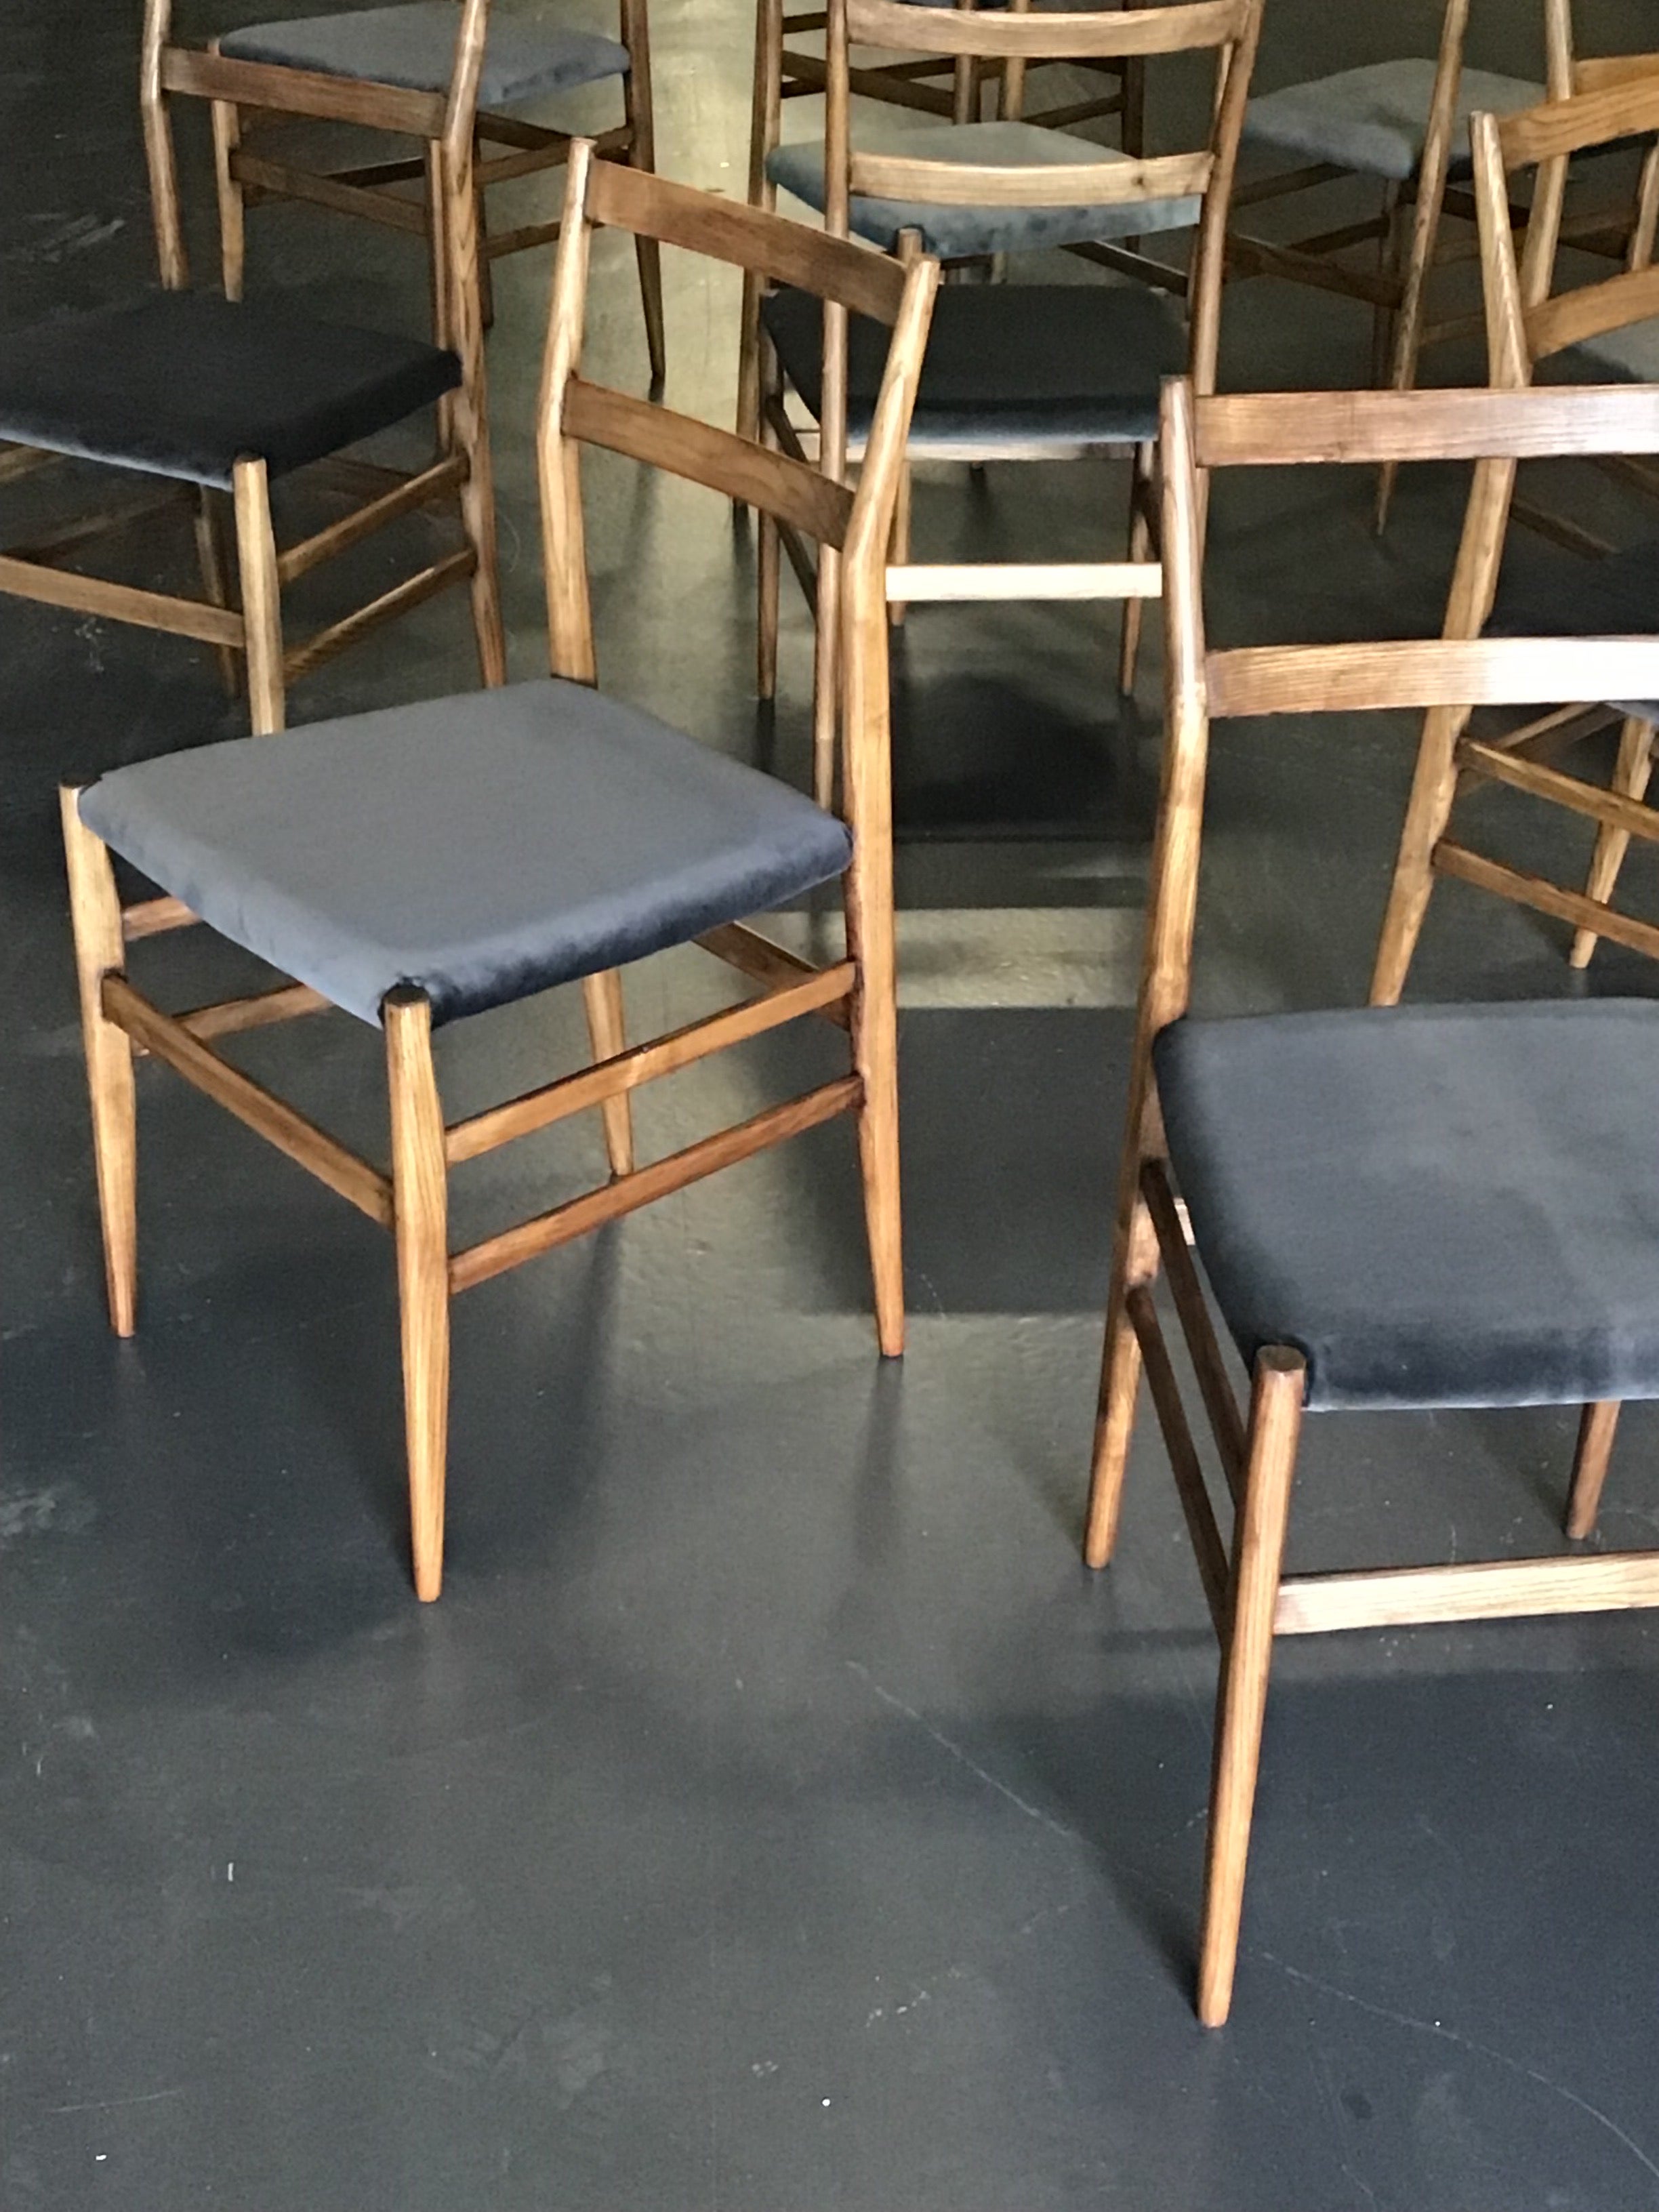 A rare set of 10 Gio Ponti Leggera dining chairs.

These chairs were in black lacquer finish but we have had them stripped back to the original ash wood in which these chairs were originally made.

They have been refinished in an antique wax which